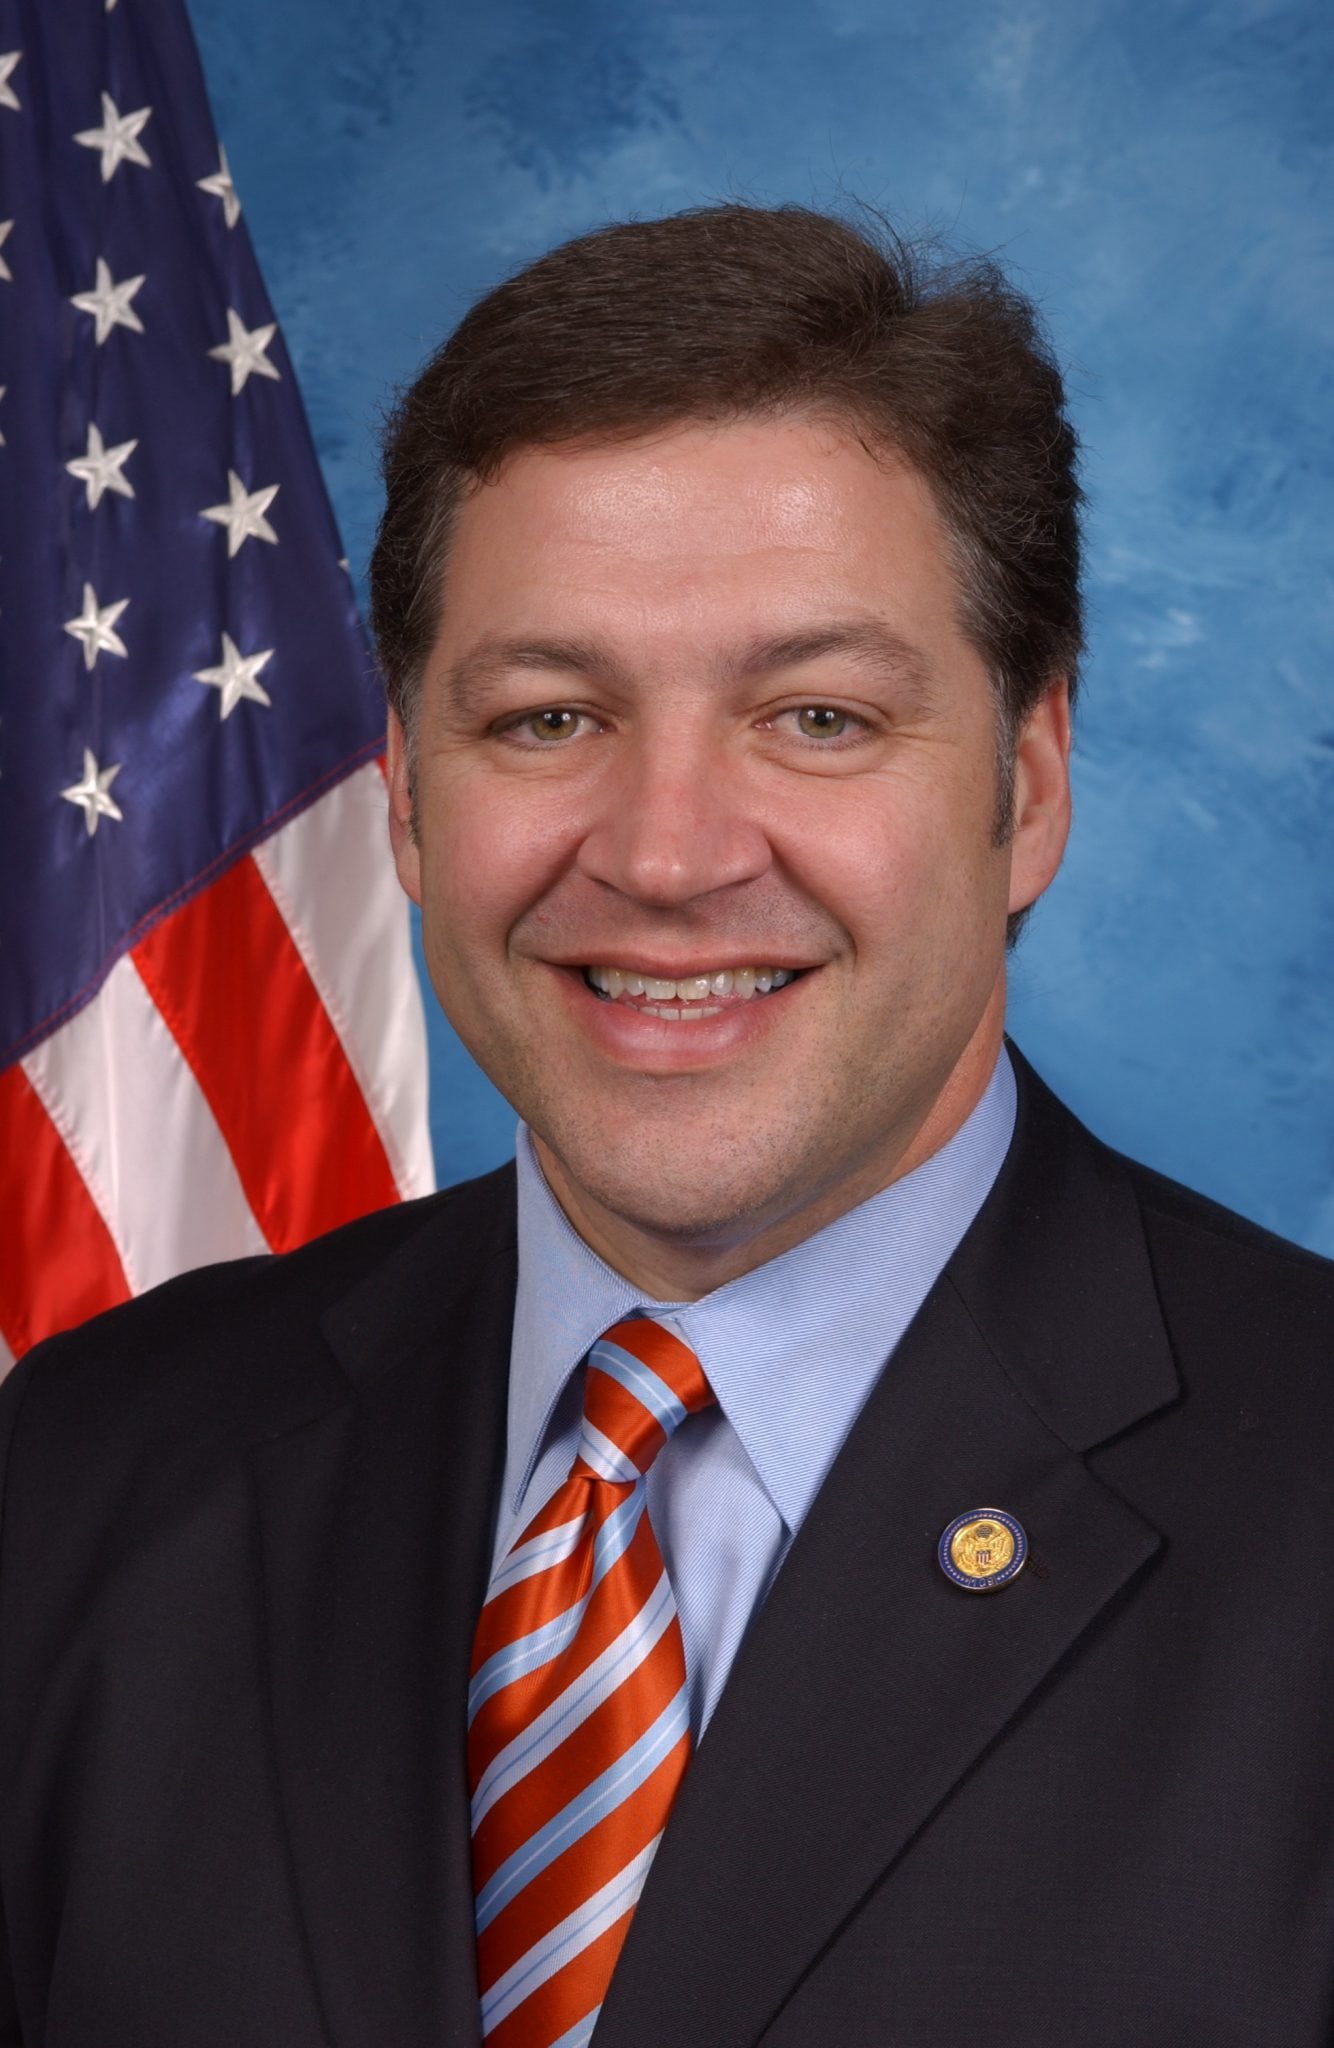 U.S. Senate, House Transportation and Infrastructure Committee Chairman Bill Shuster